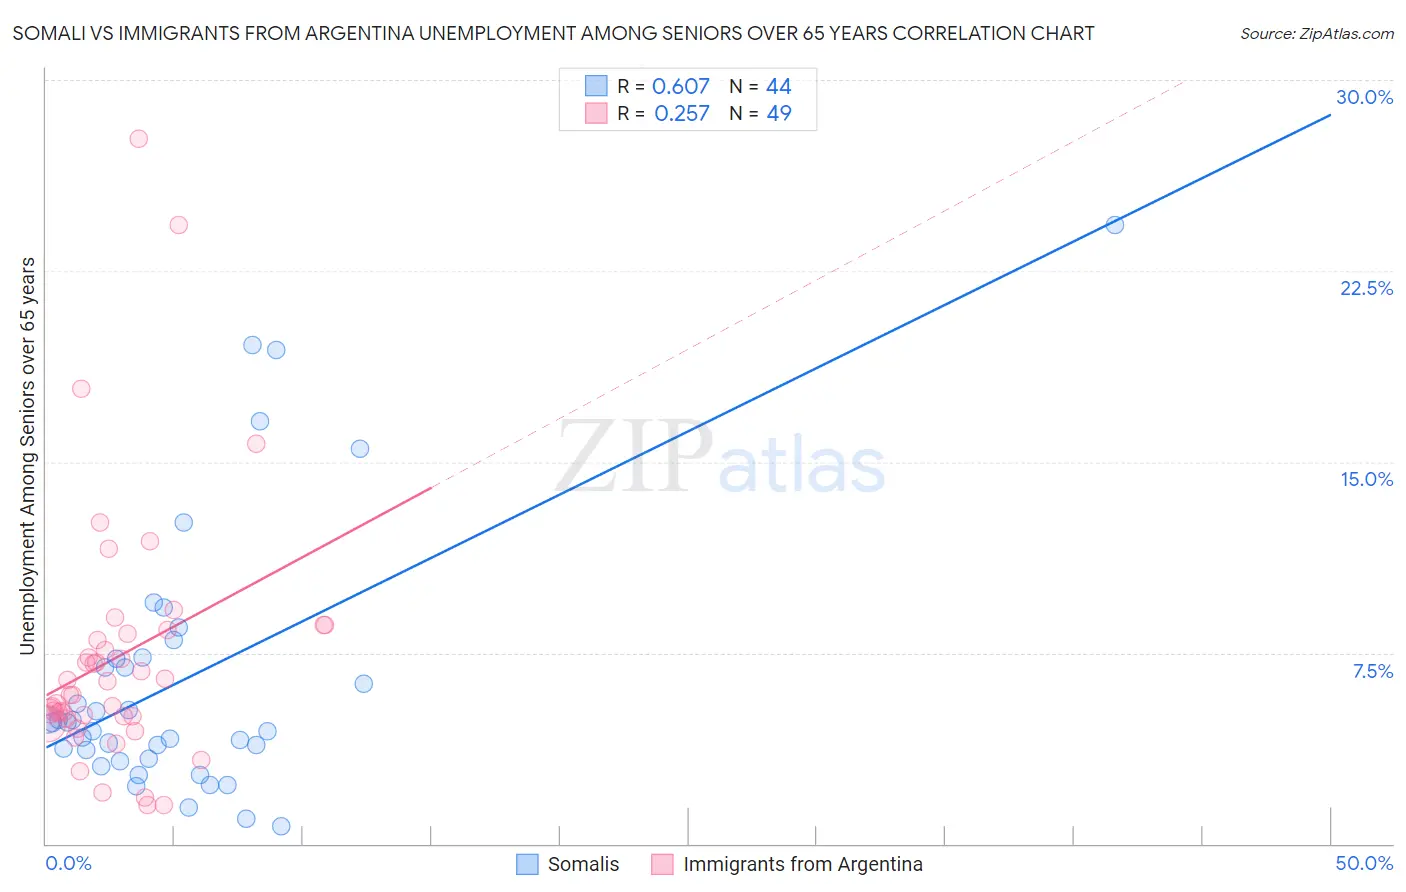 Somali vs Immigrants from Argentina Unemployment Among Seniors over 65 years